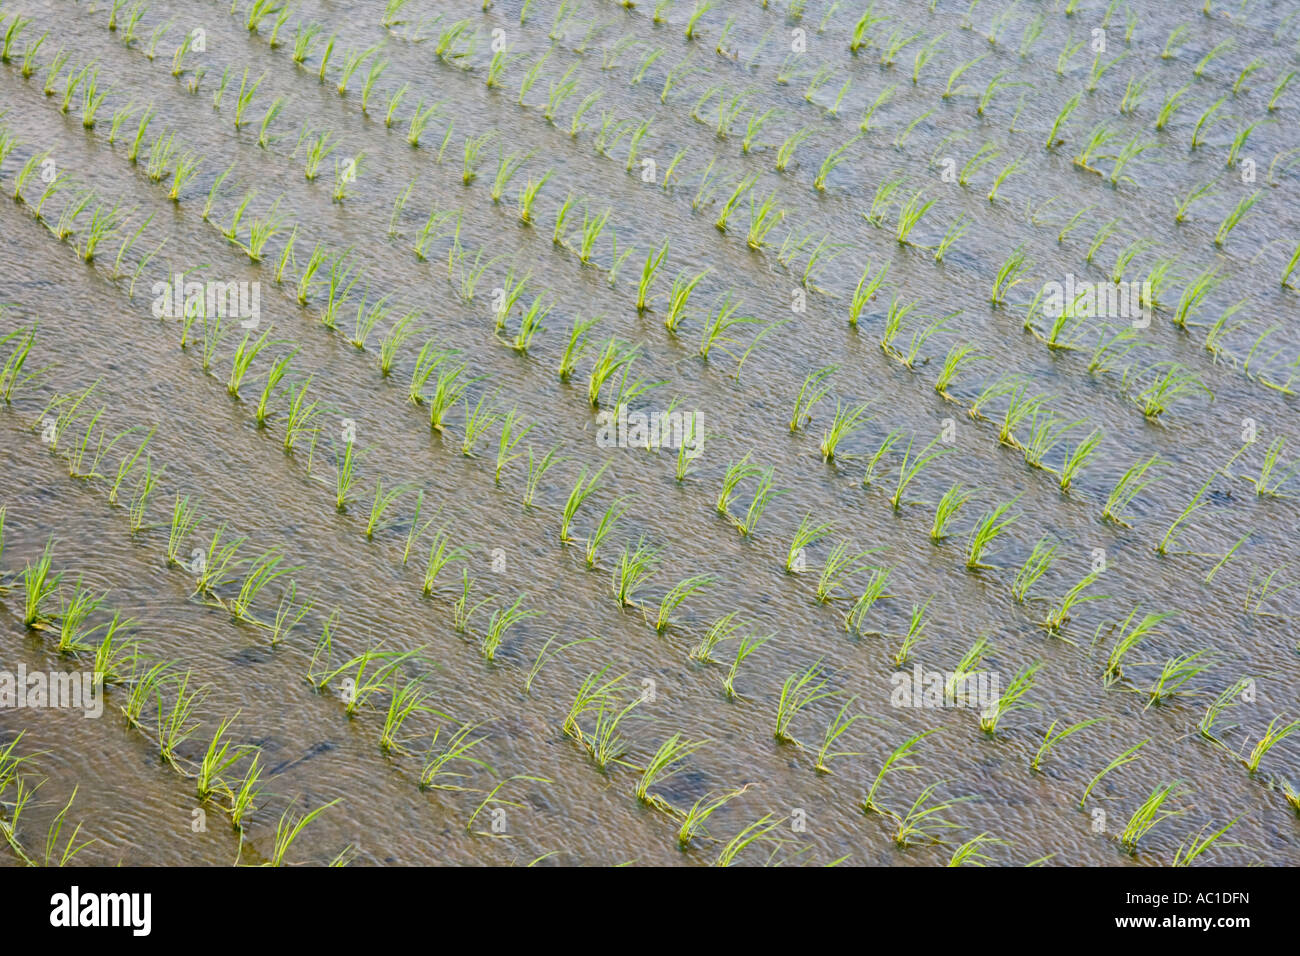 Tiny Rice Seedlings Growing in Flooded Field in Gangwon Do Province South Korea Stock Photo